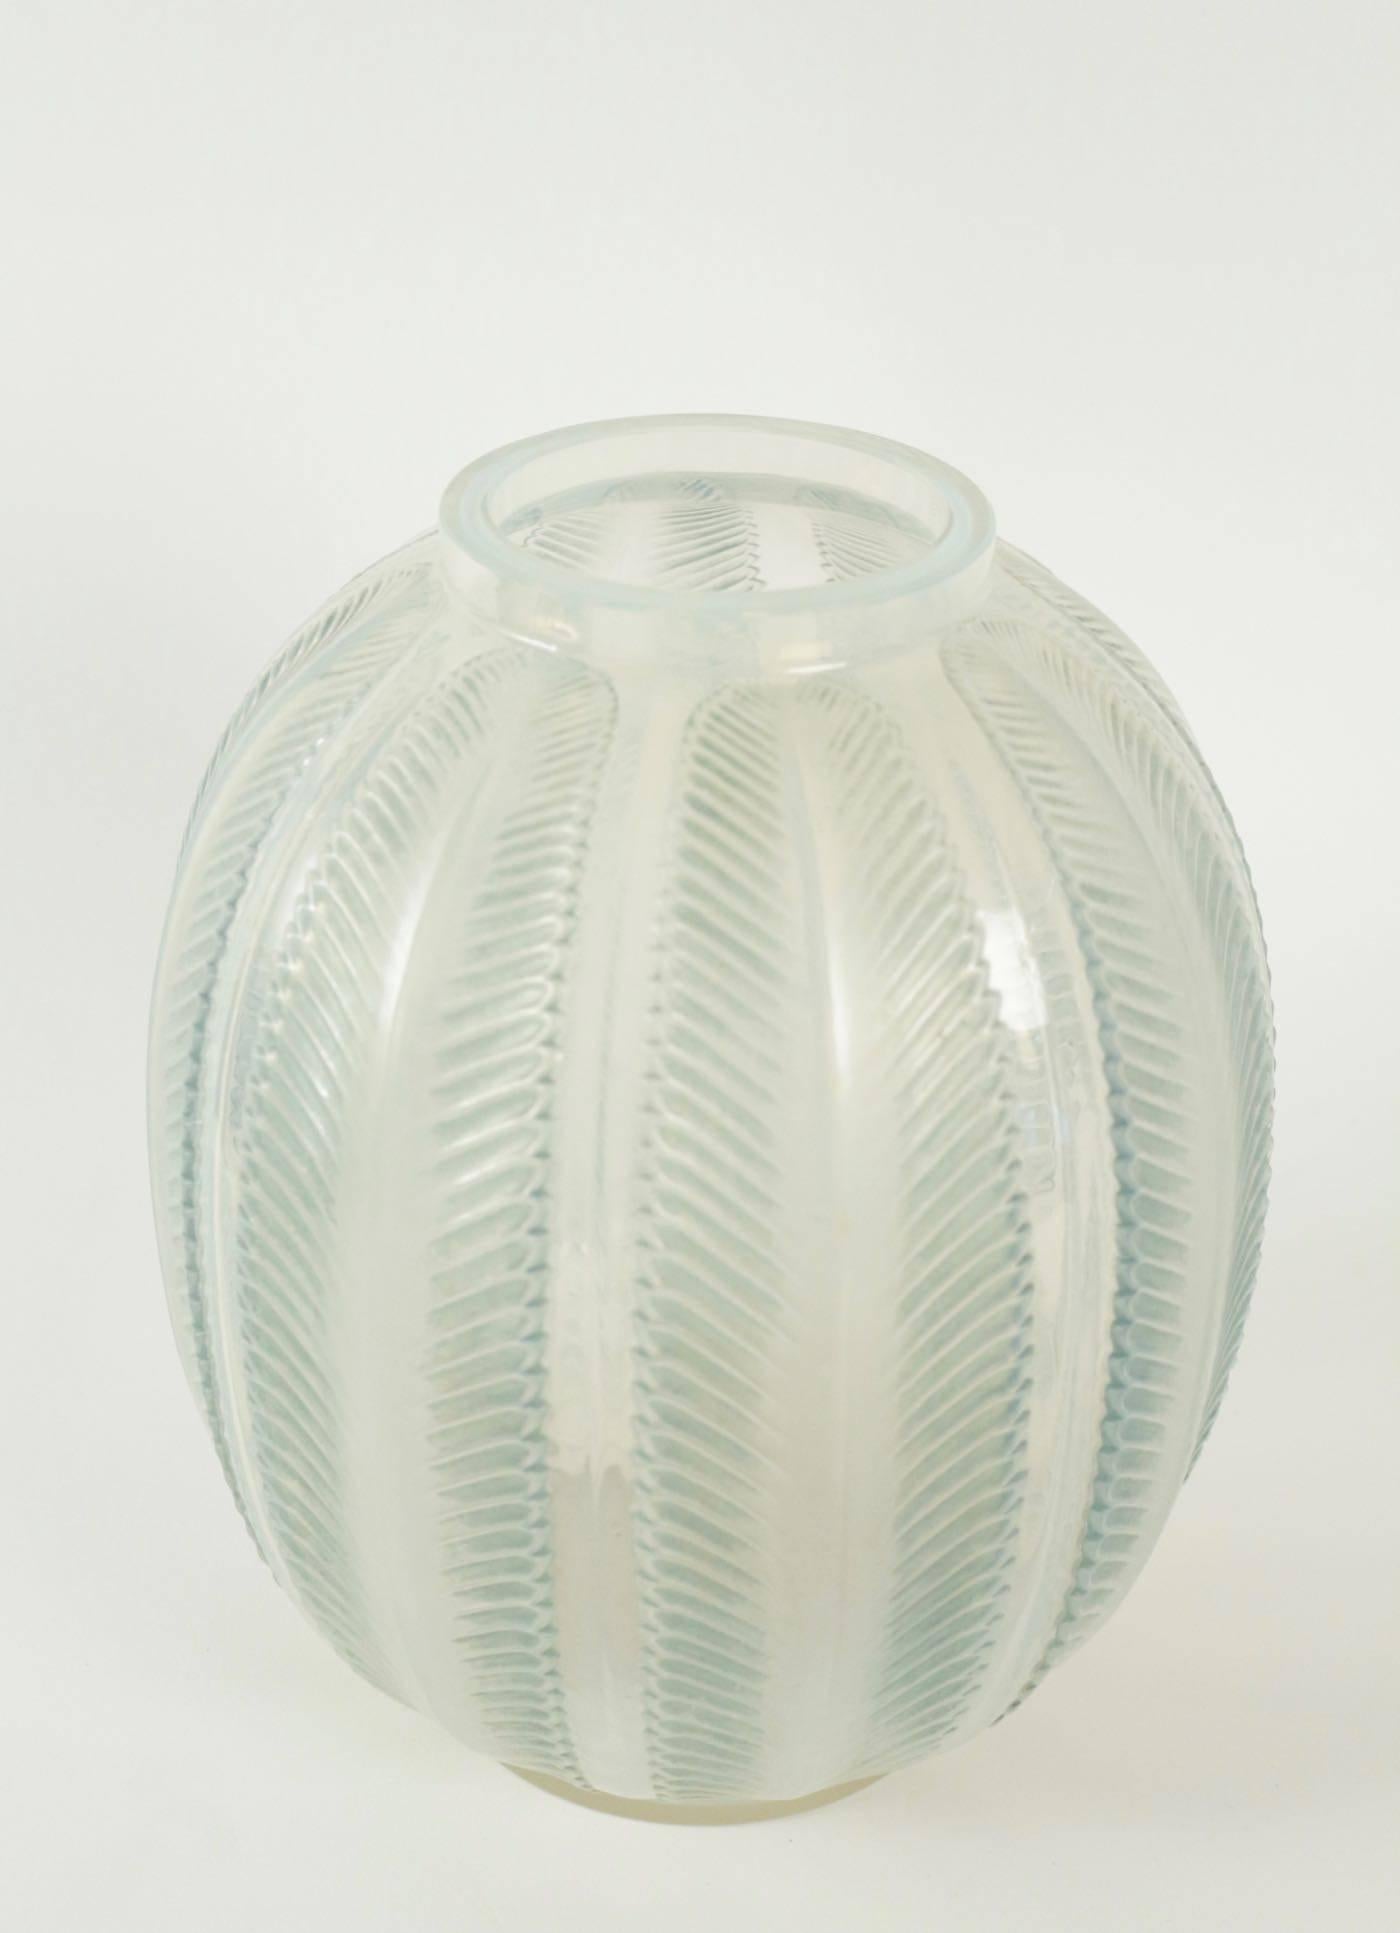 Cased white opalescent and blue patinated palm frond motif glass.
Large palm fronds decorated opalescent glass with vertical palm
René Lalique (1860-1945).
Vase 